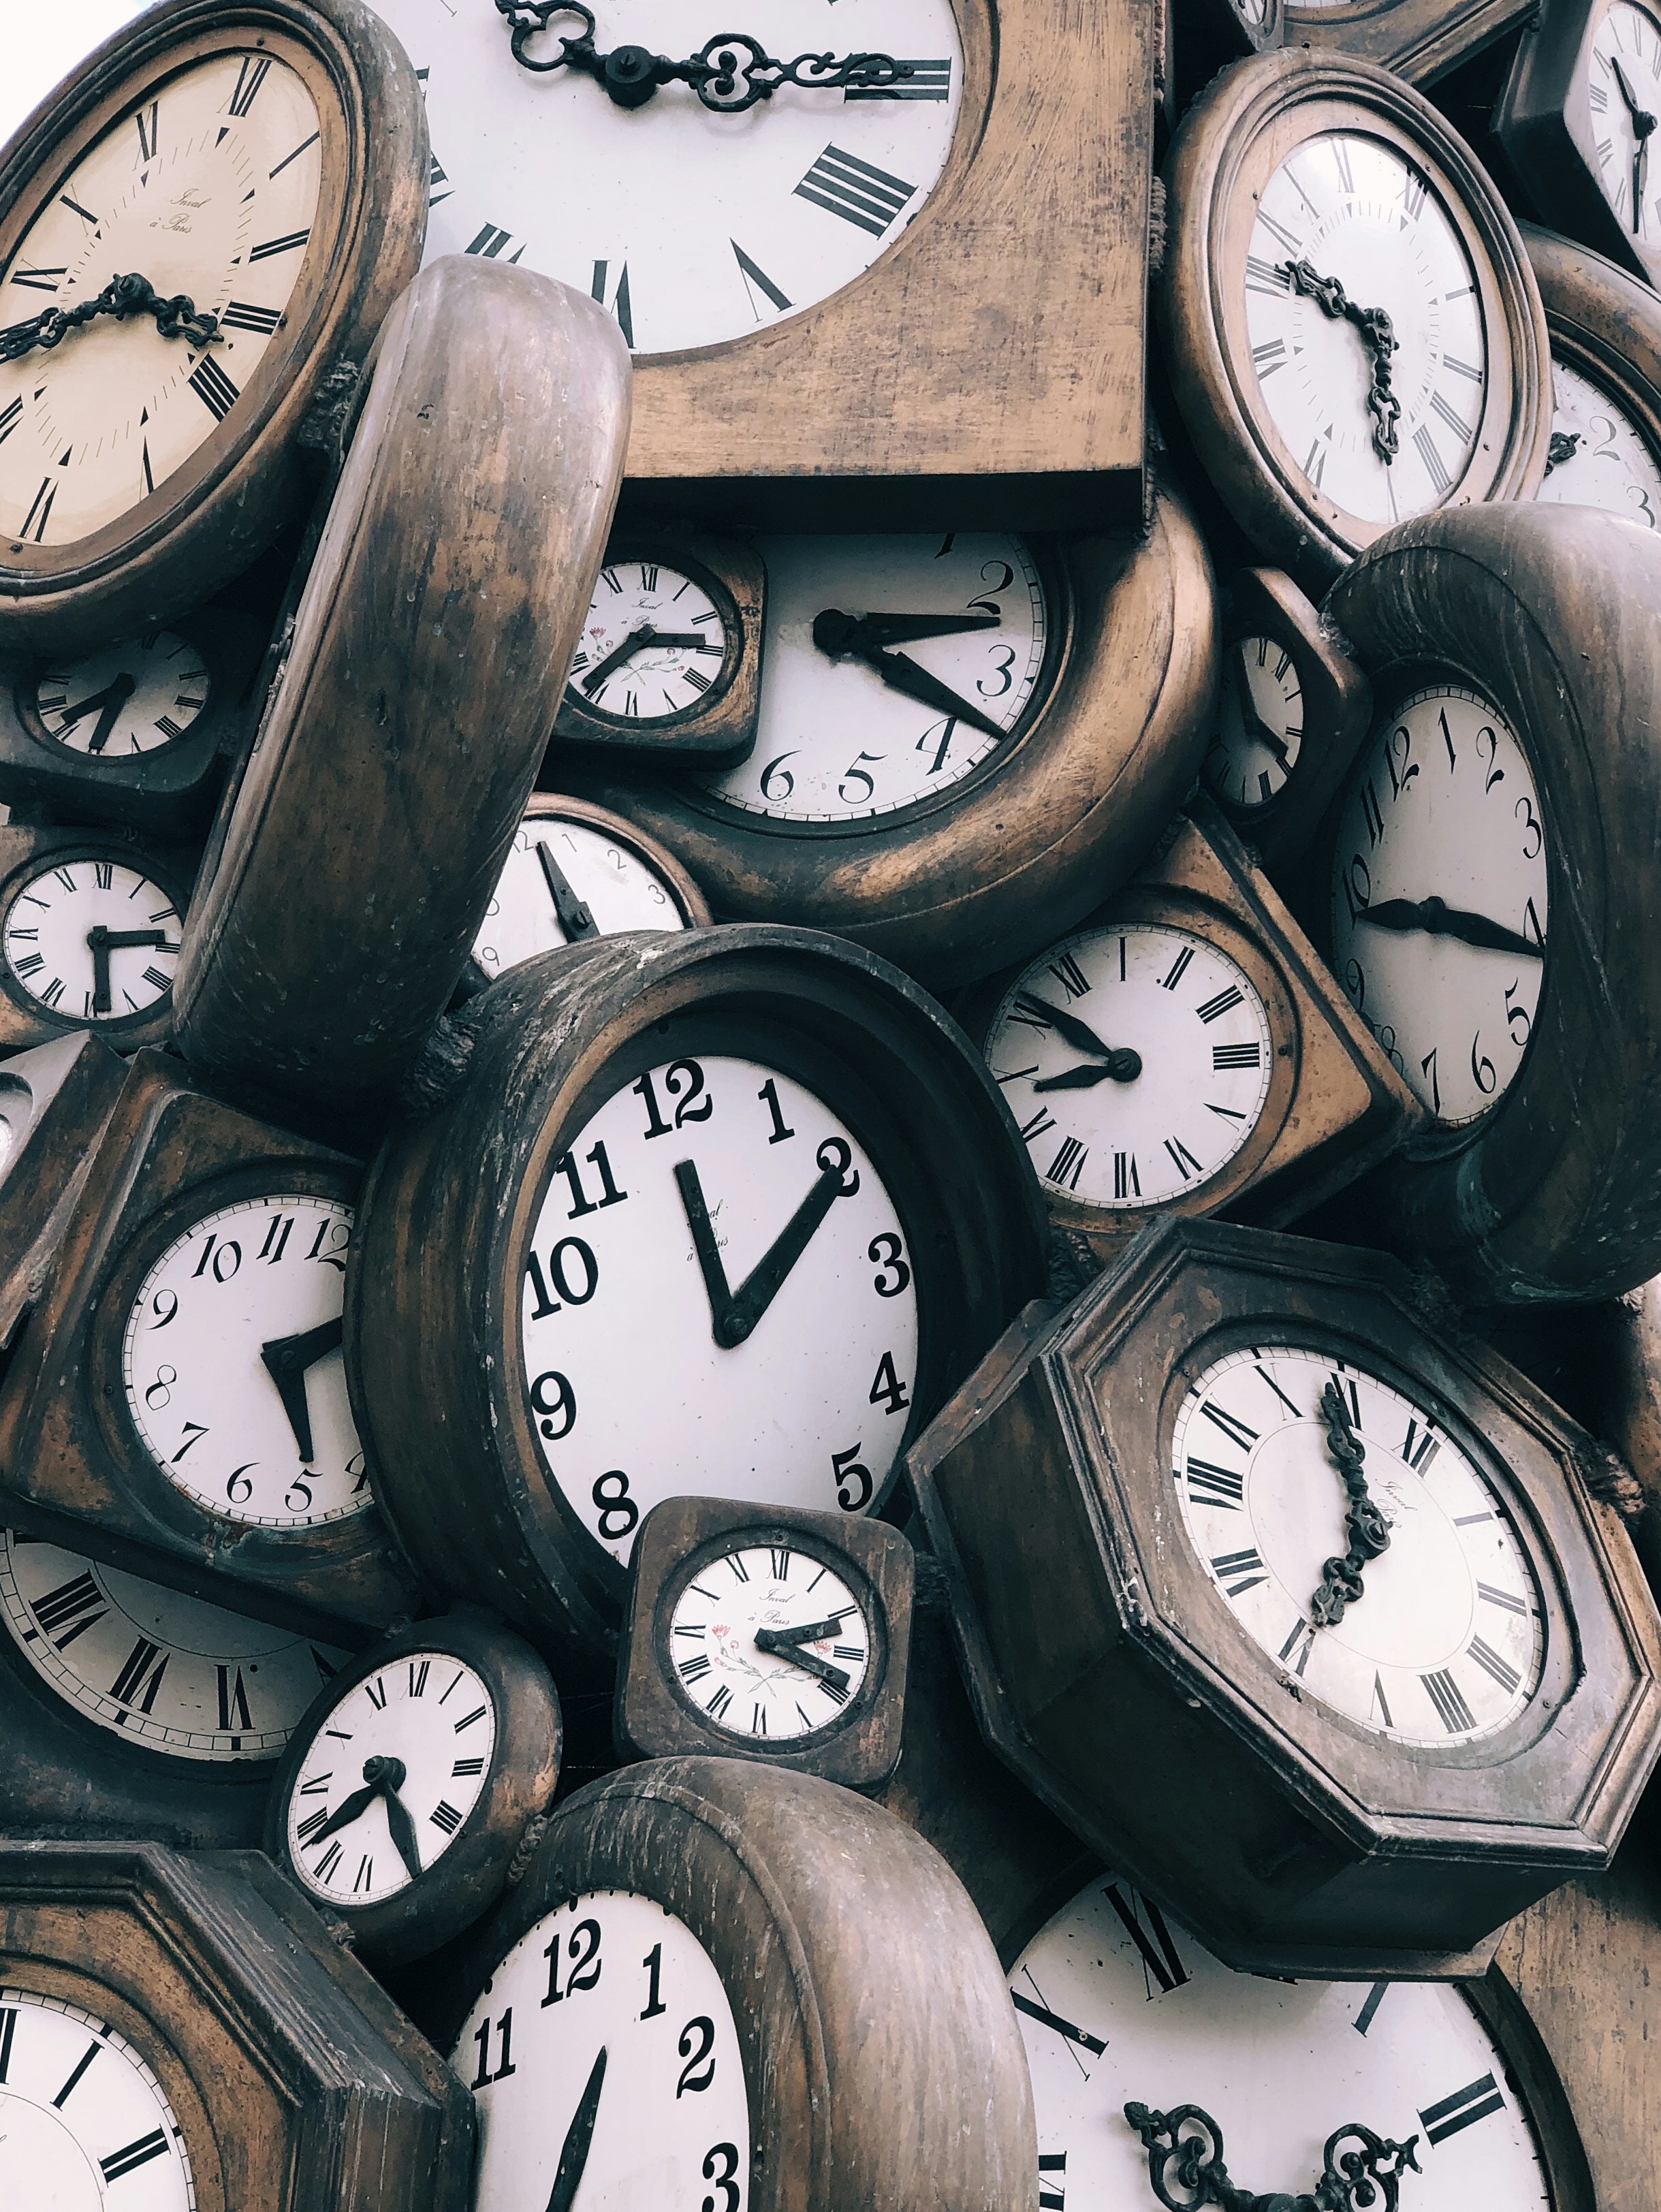 Choose from a curated selection of clock photos. Always free on Unsplash.